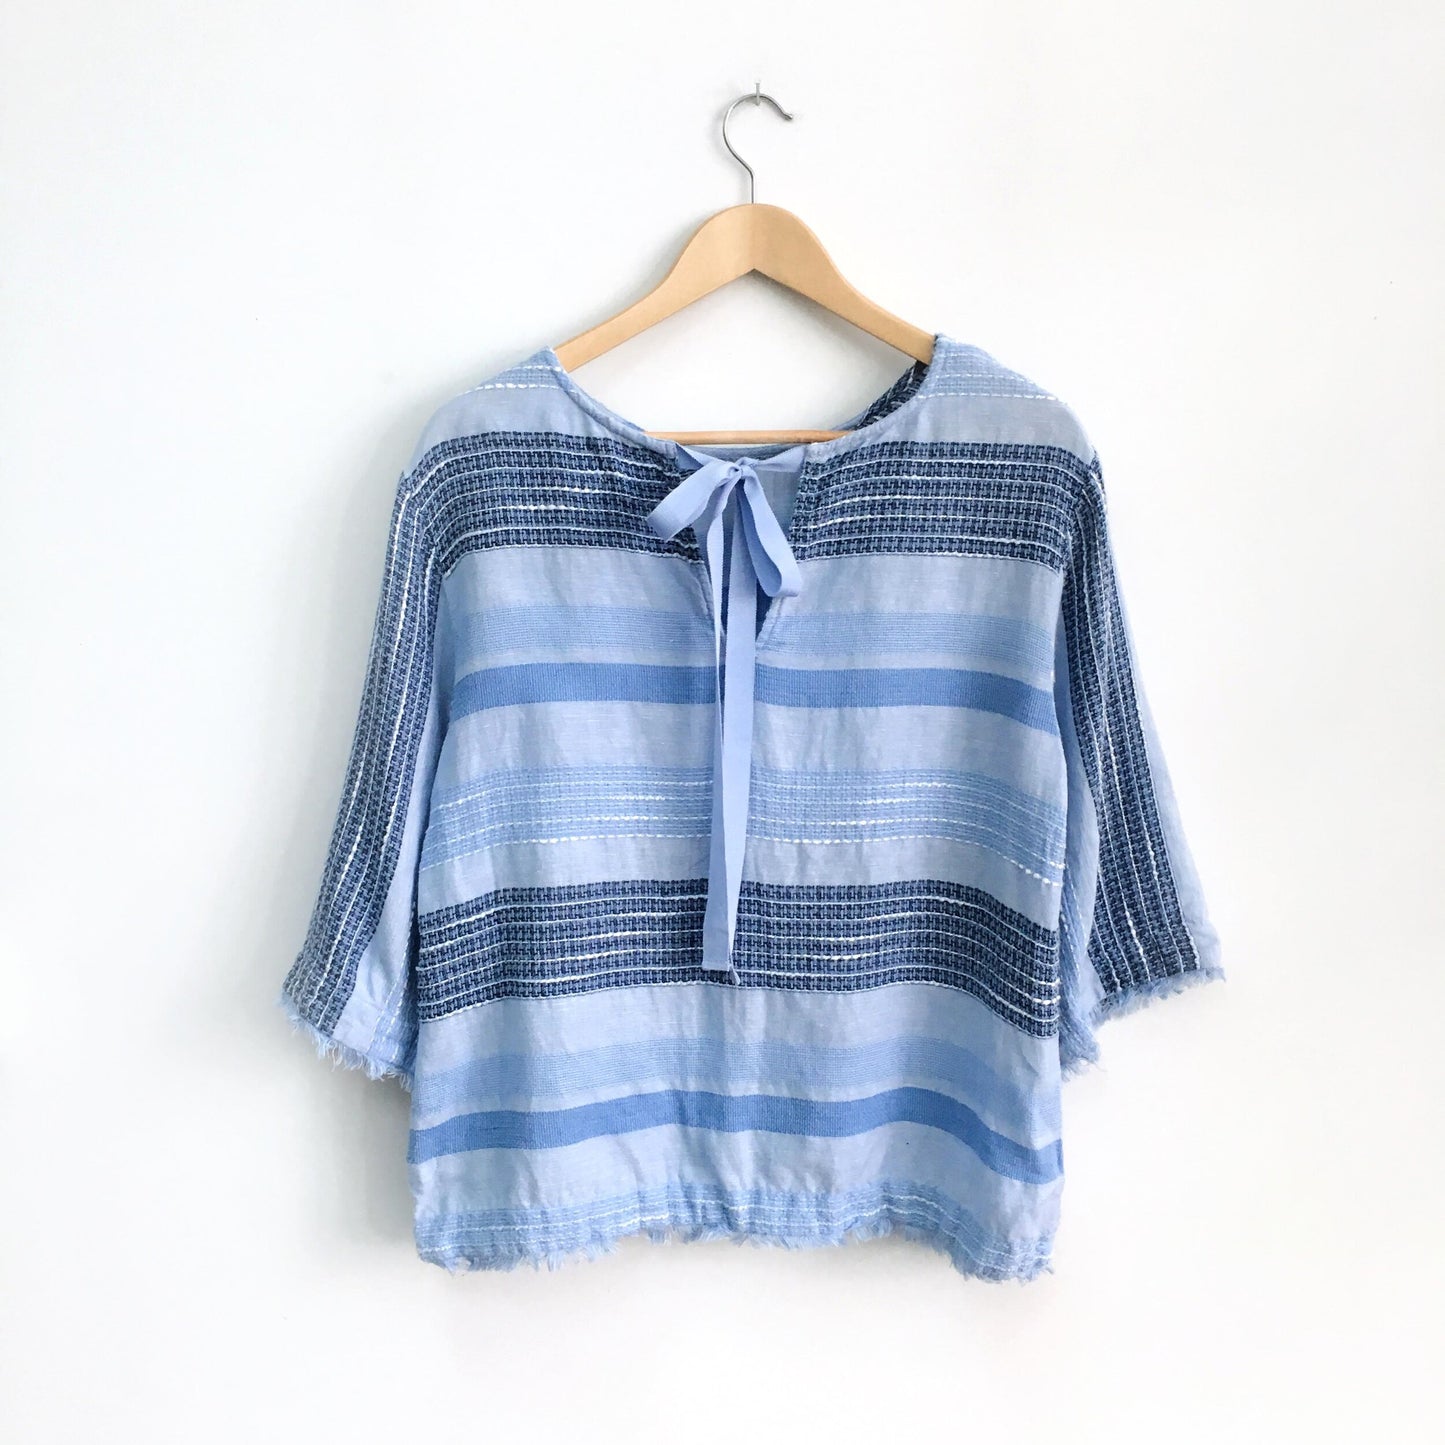 Cloth &amp; Stone Woven Top - size Small